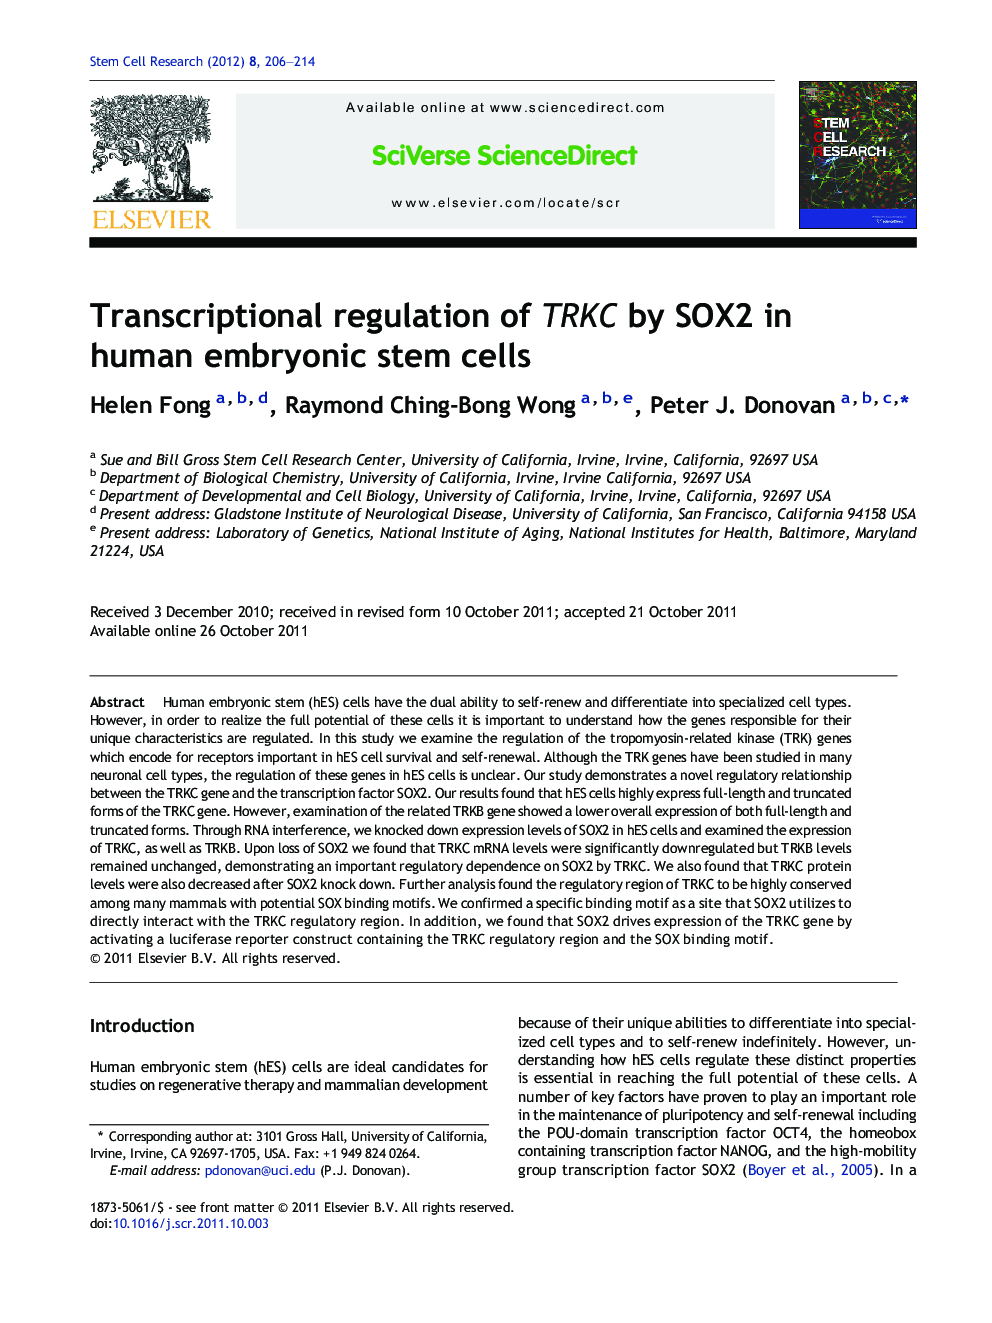 Transcriptional regulation of TRKC by SOX2 in human embryonic stem cells